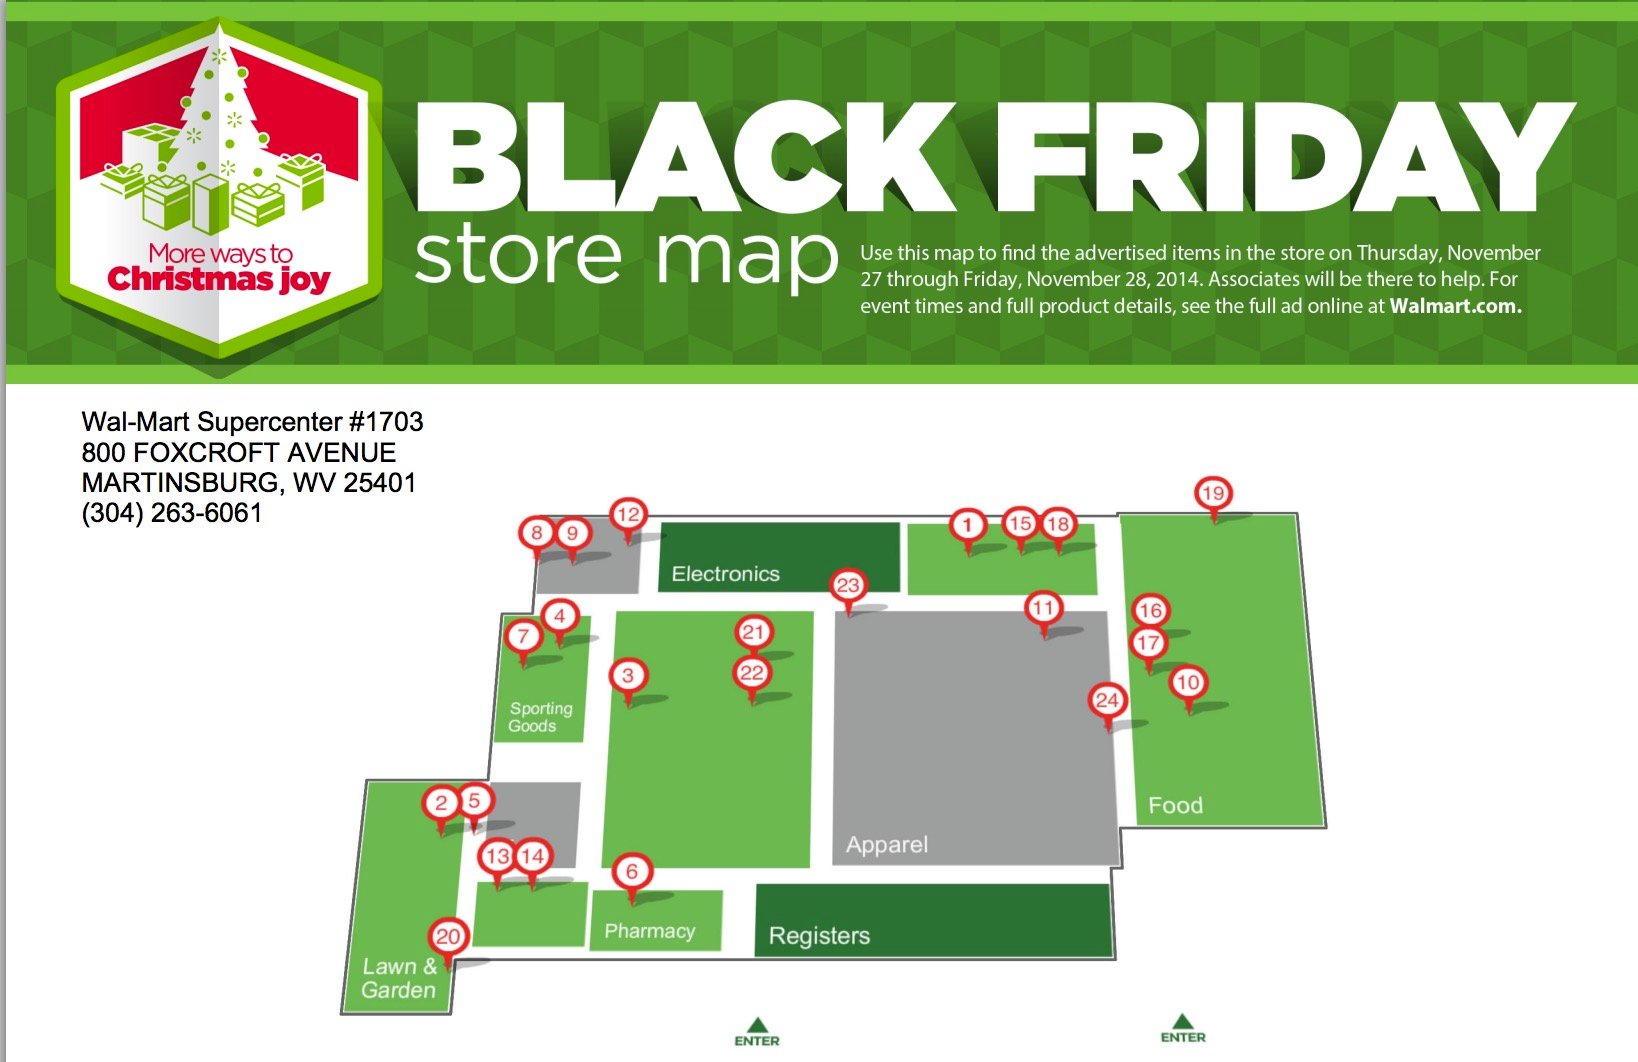 Best Walmart Black Friday Deals Pinpointed on Maps